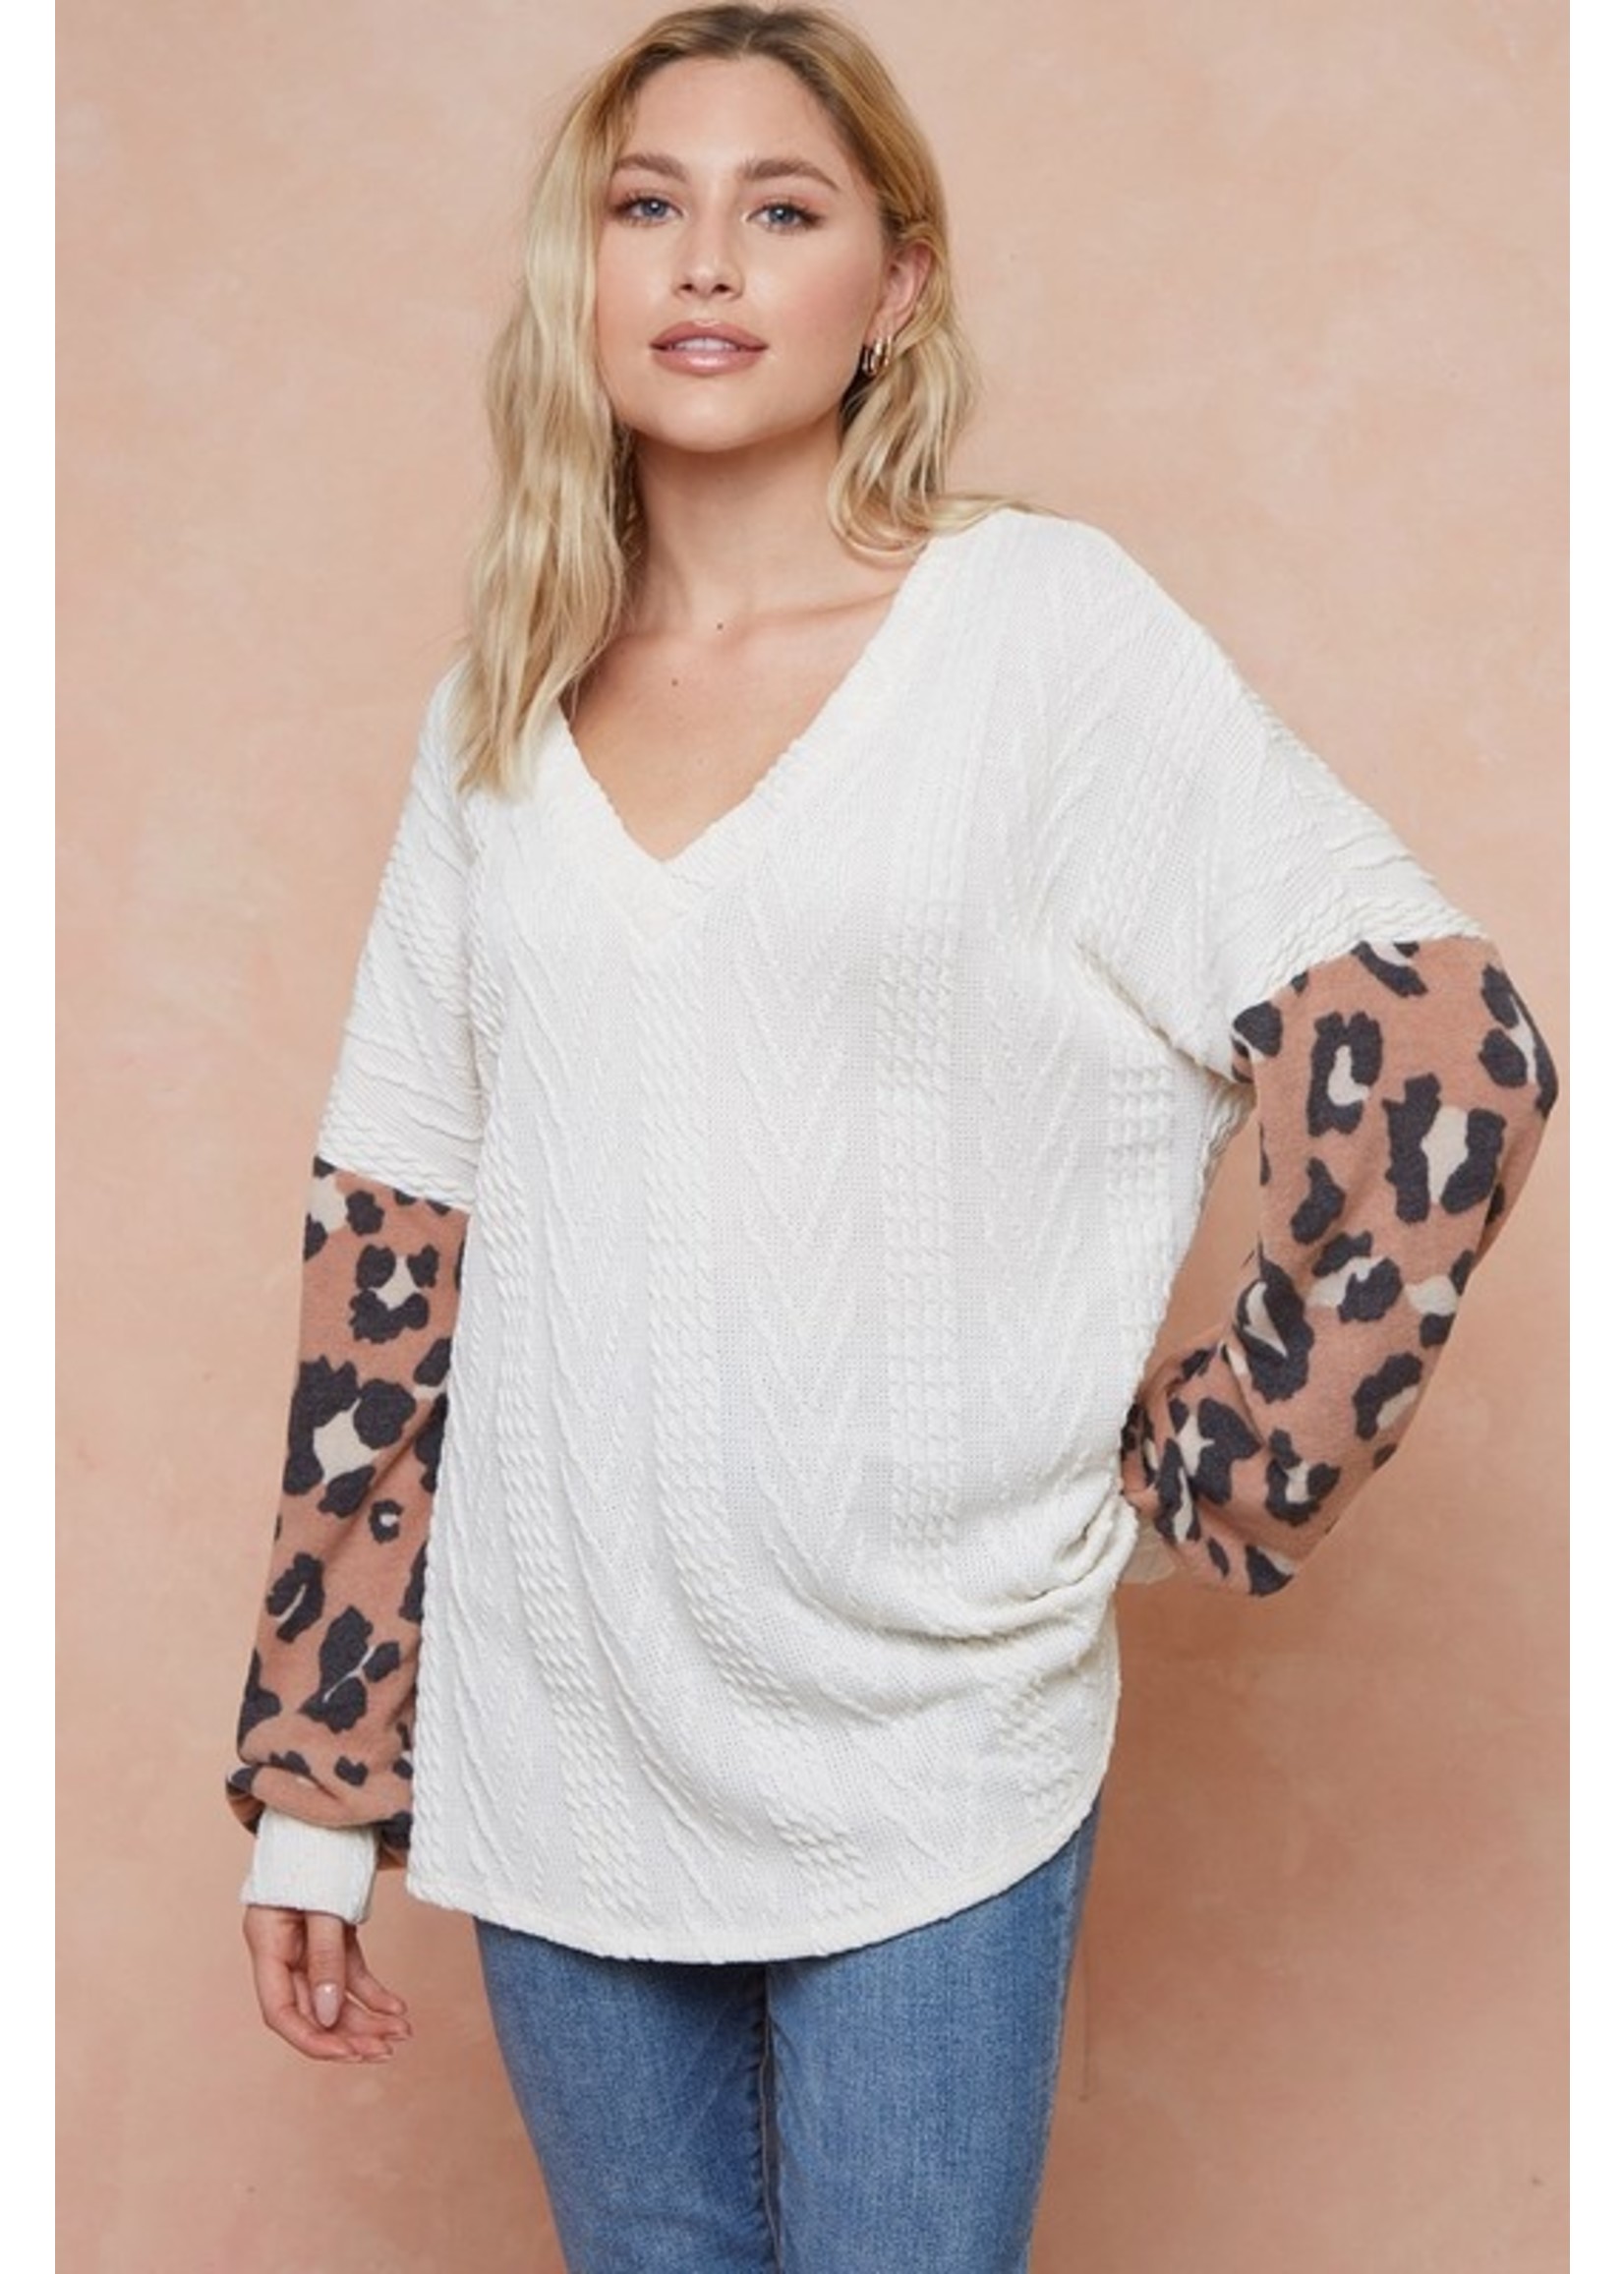 The Vale Leopard Sleeve Sweater Top